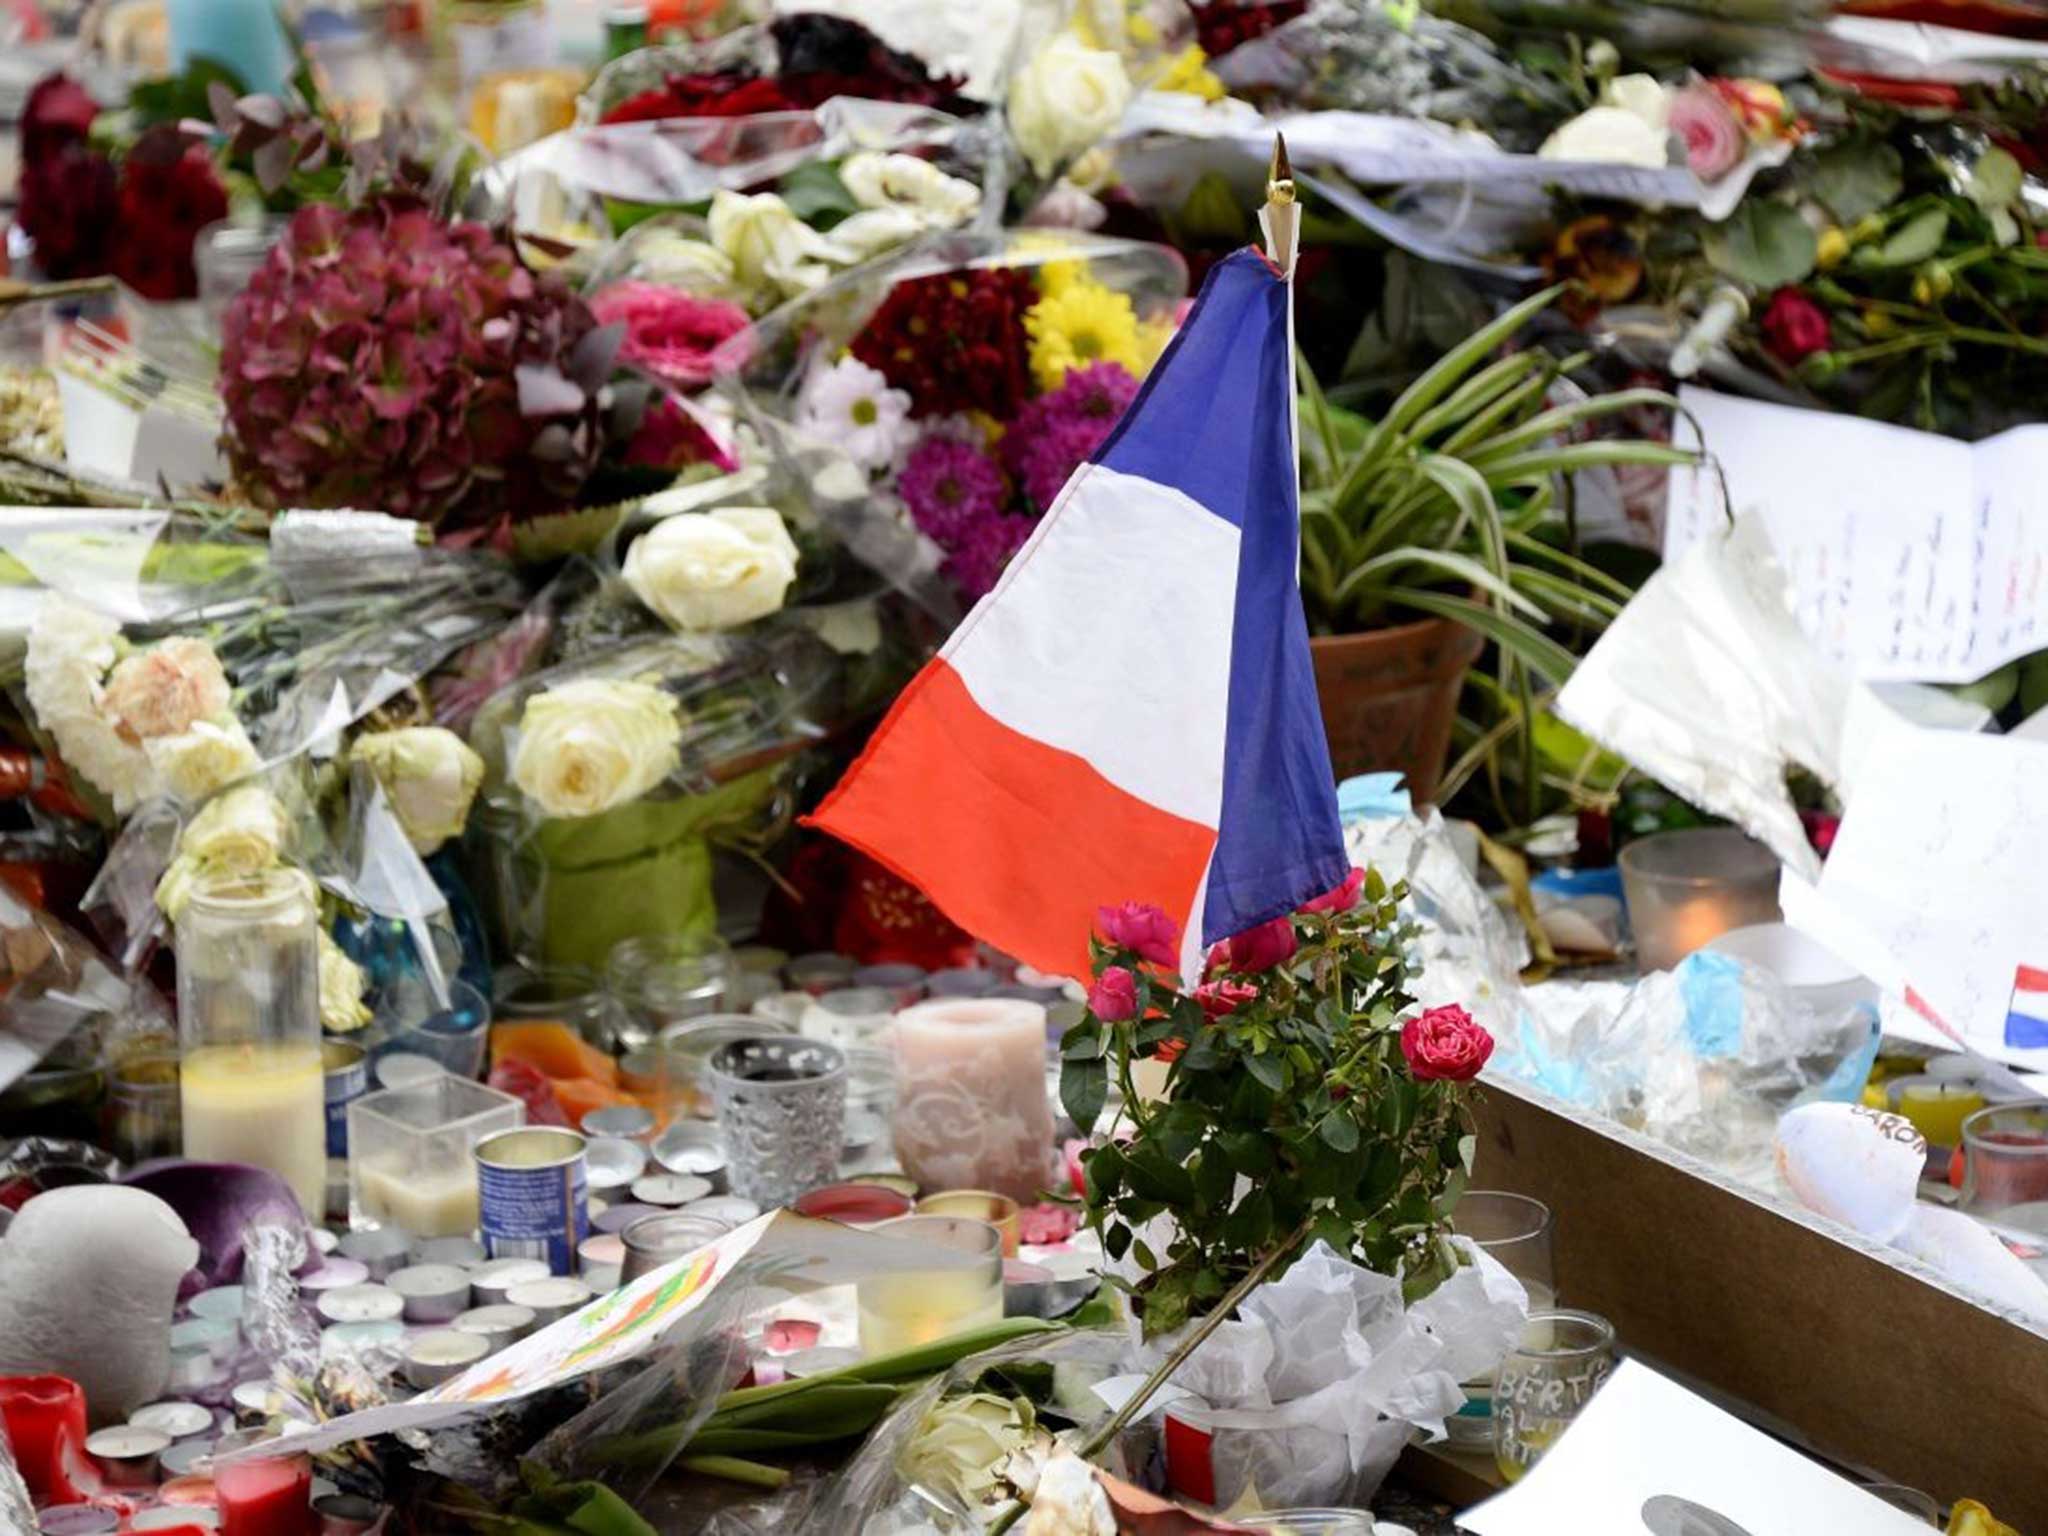 Tributes outside the Bataclan concert hall where 89 people were killed